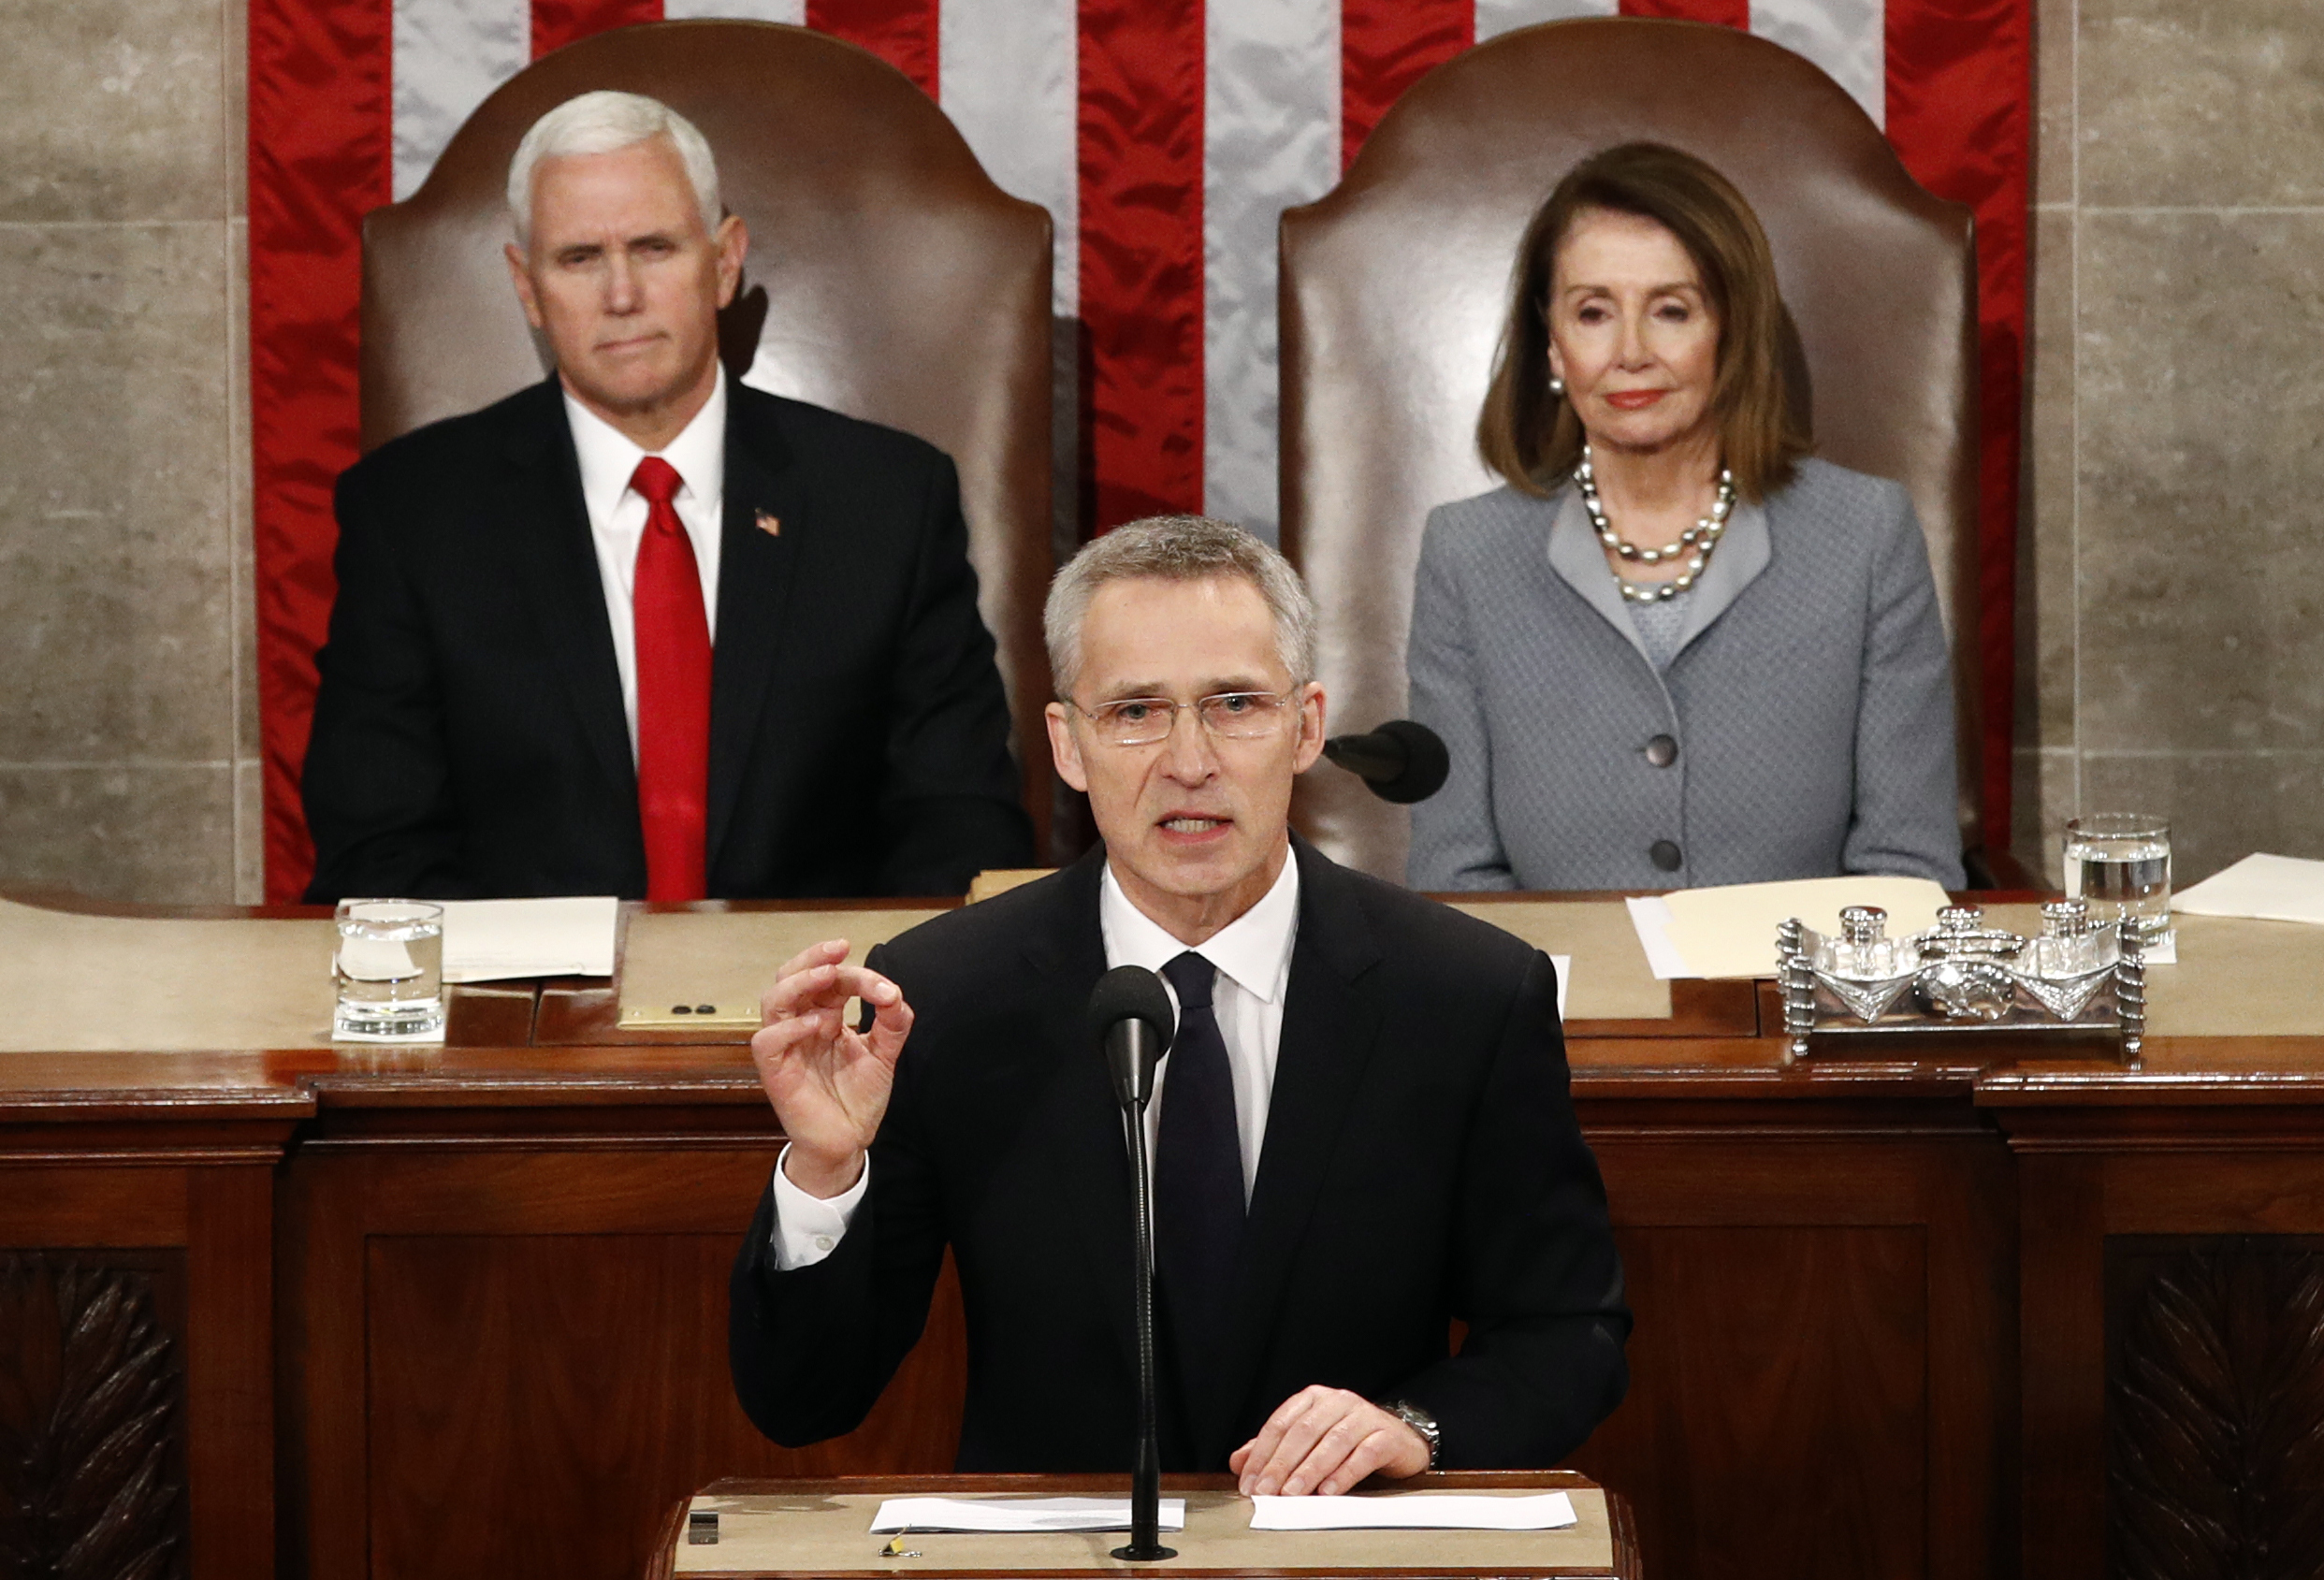 NATO Secretary General Jens Stoltenberg addresses a Joint Meeting of Congress on Capitol Hill in Washington on Wednesday, April 3, 2019.